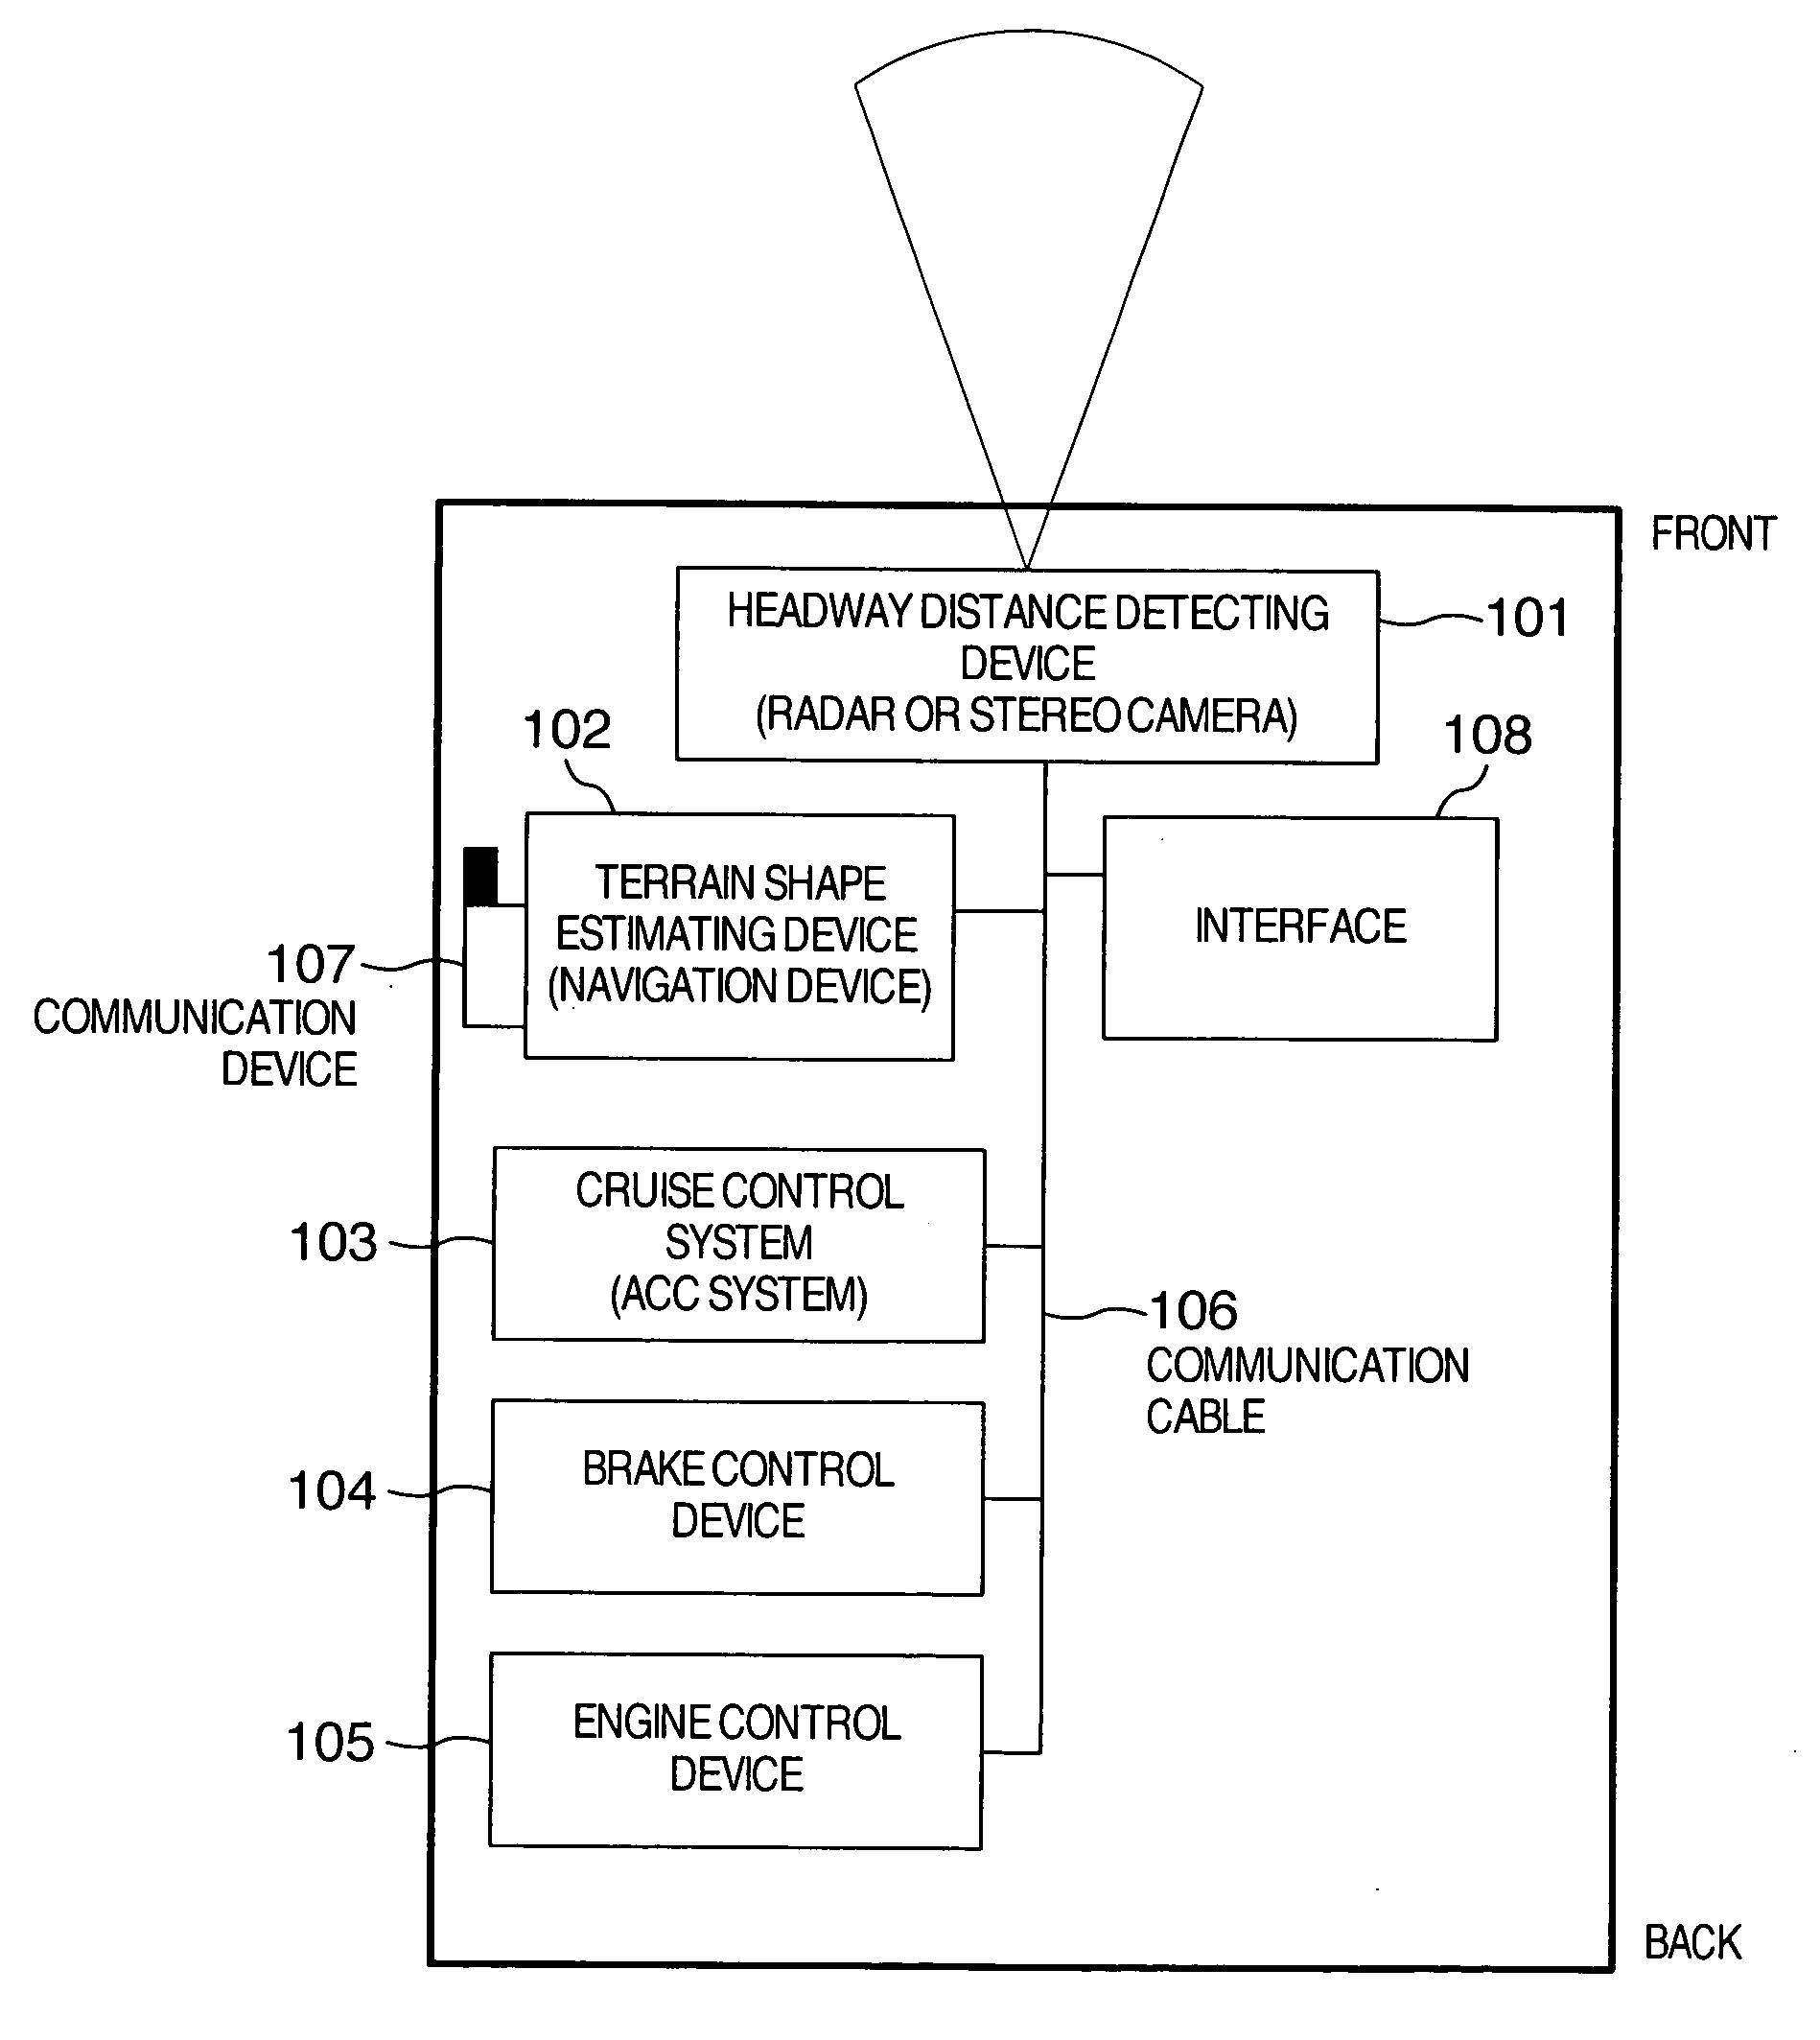 Adaptive cruise control system and navigation system's media with vehicle control information included